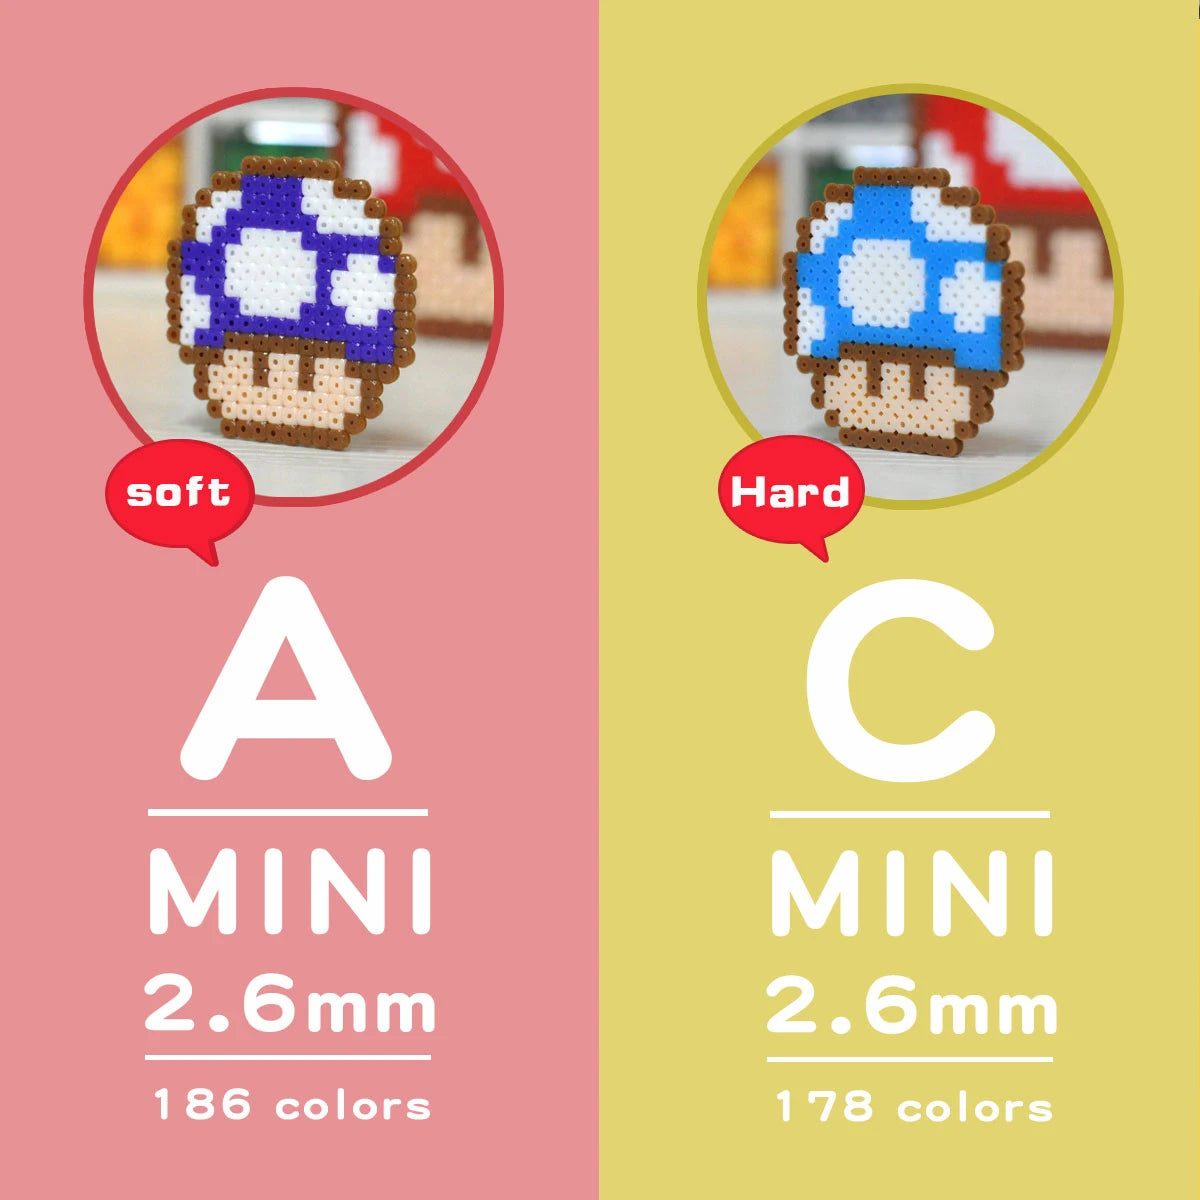 What's the difference between A-2.6mm and C-2.6mm Mini Artkal Beads?